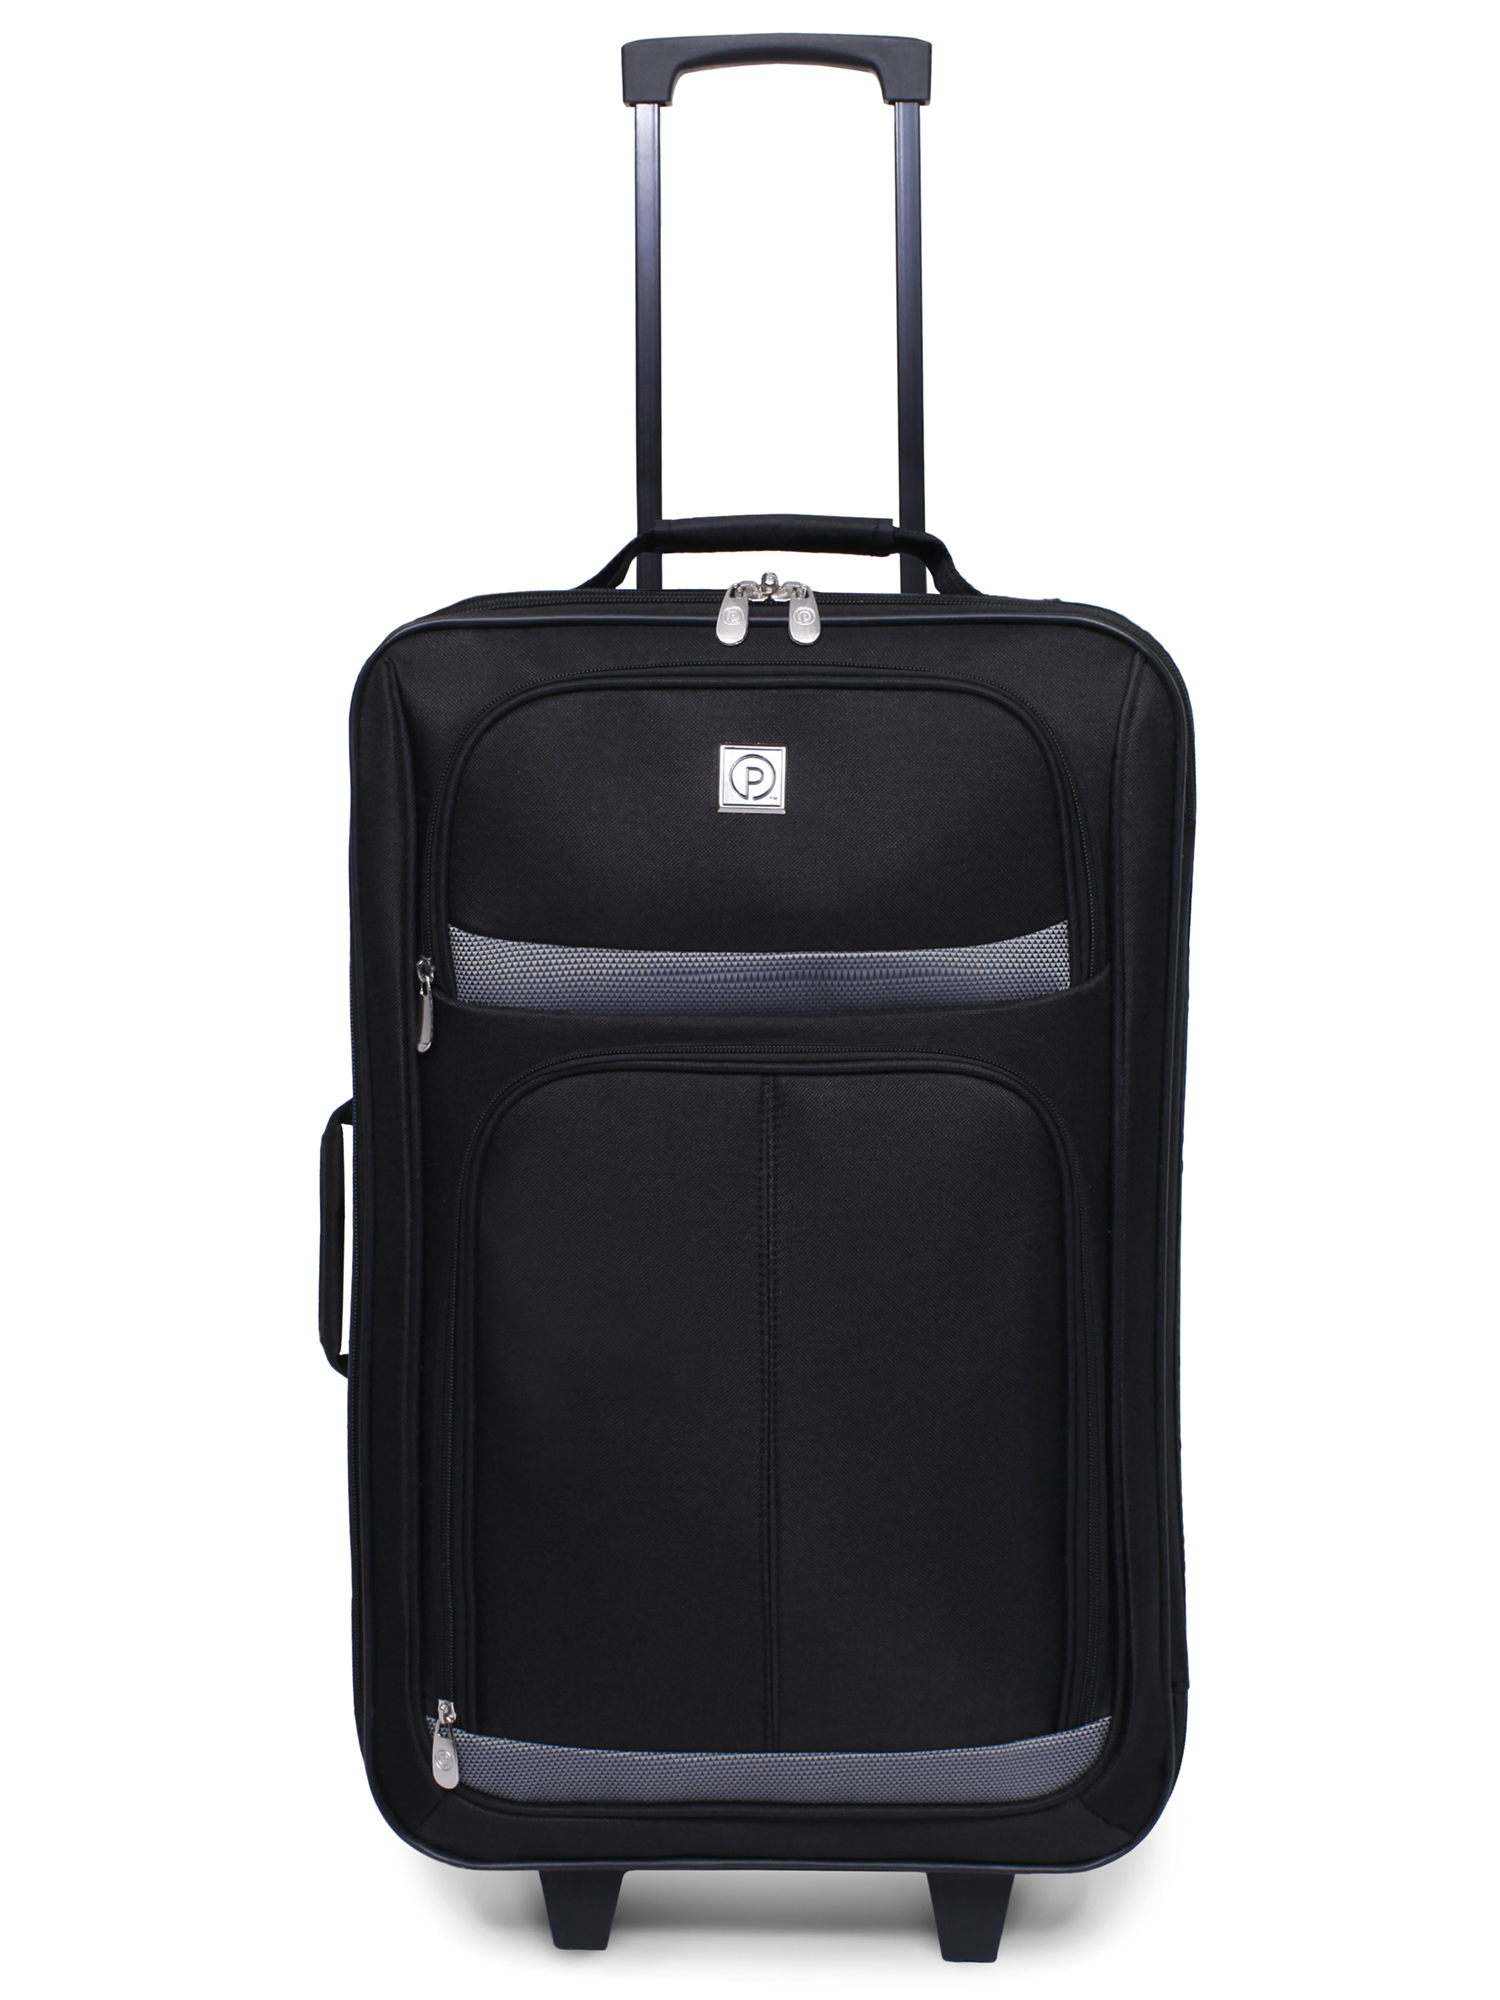 Protege 5 Piece 2-Wheel Luggage Set, Check and Carry On Size - Walmart.com